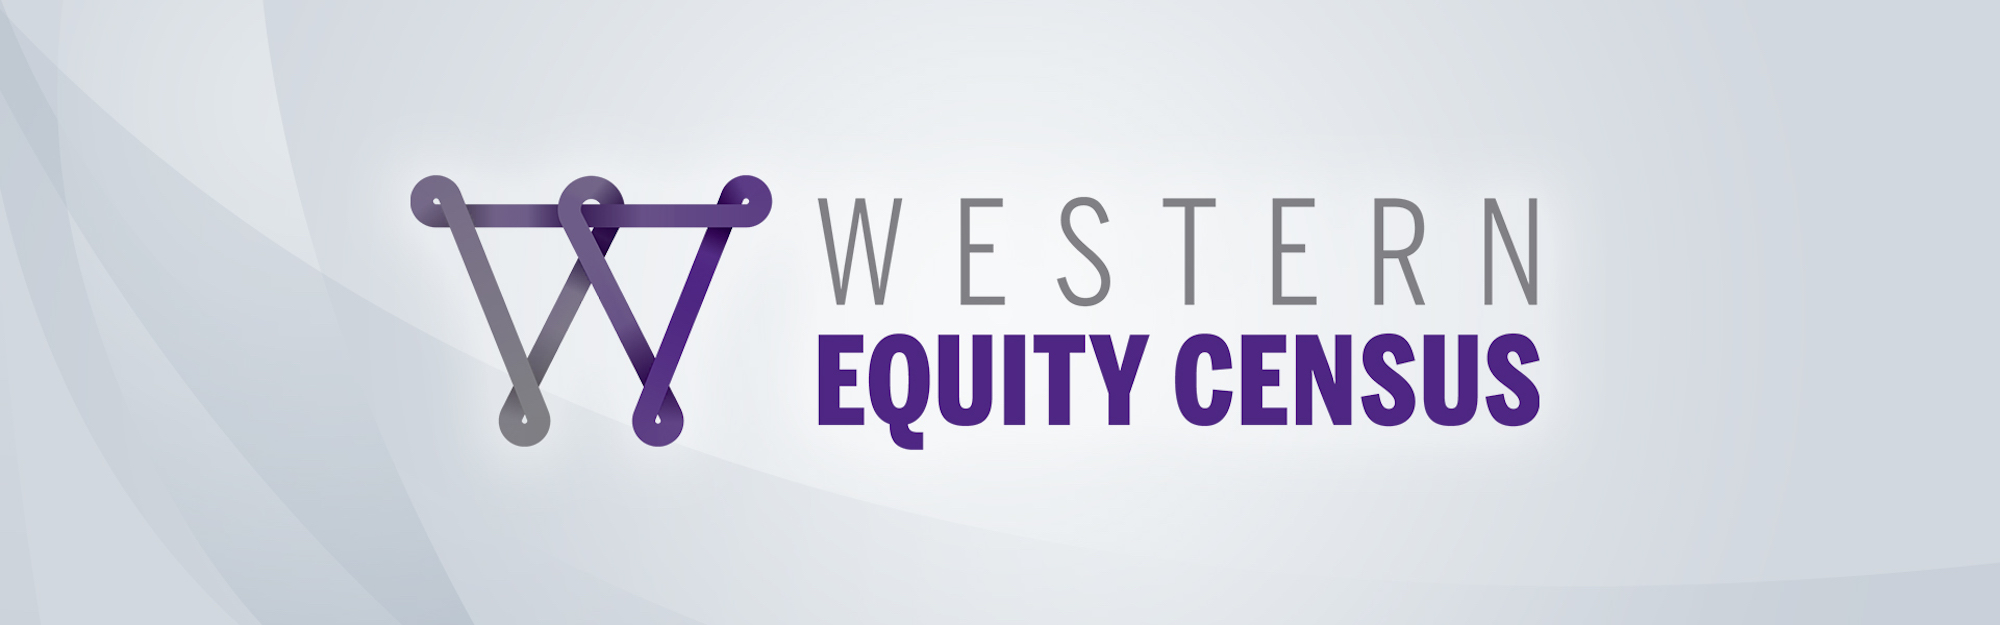 Western Equity Census Logo